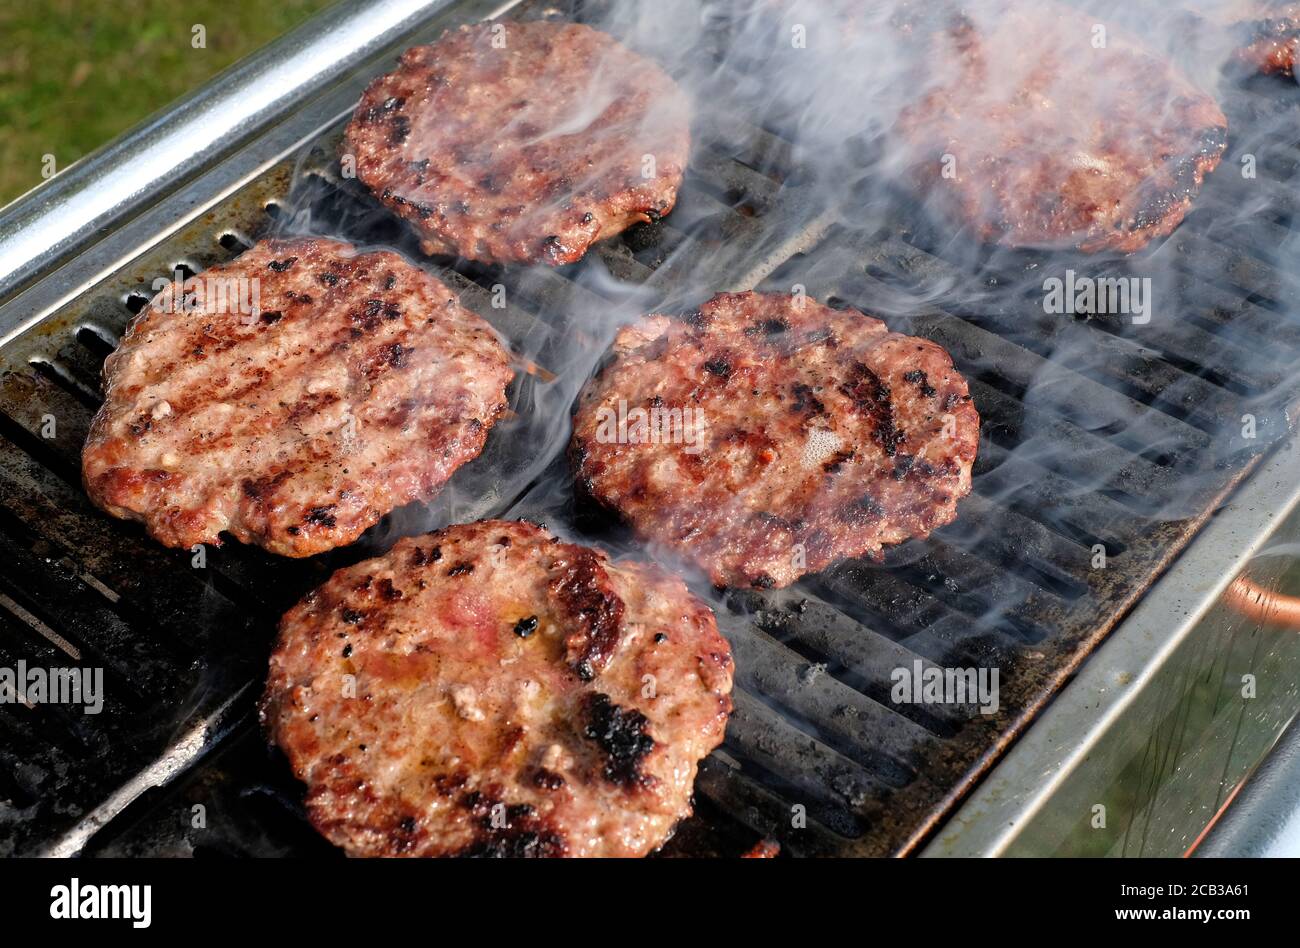 sizzling beefburgers cooking on barbecue grill Stock Photo - Alamy